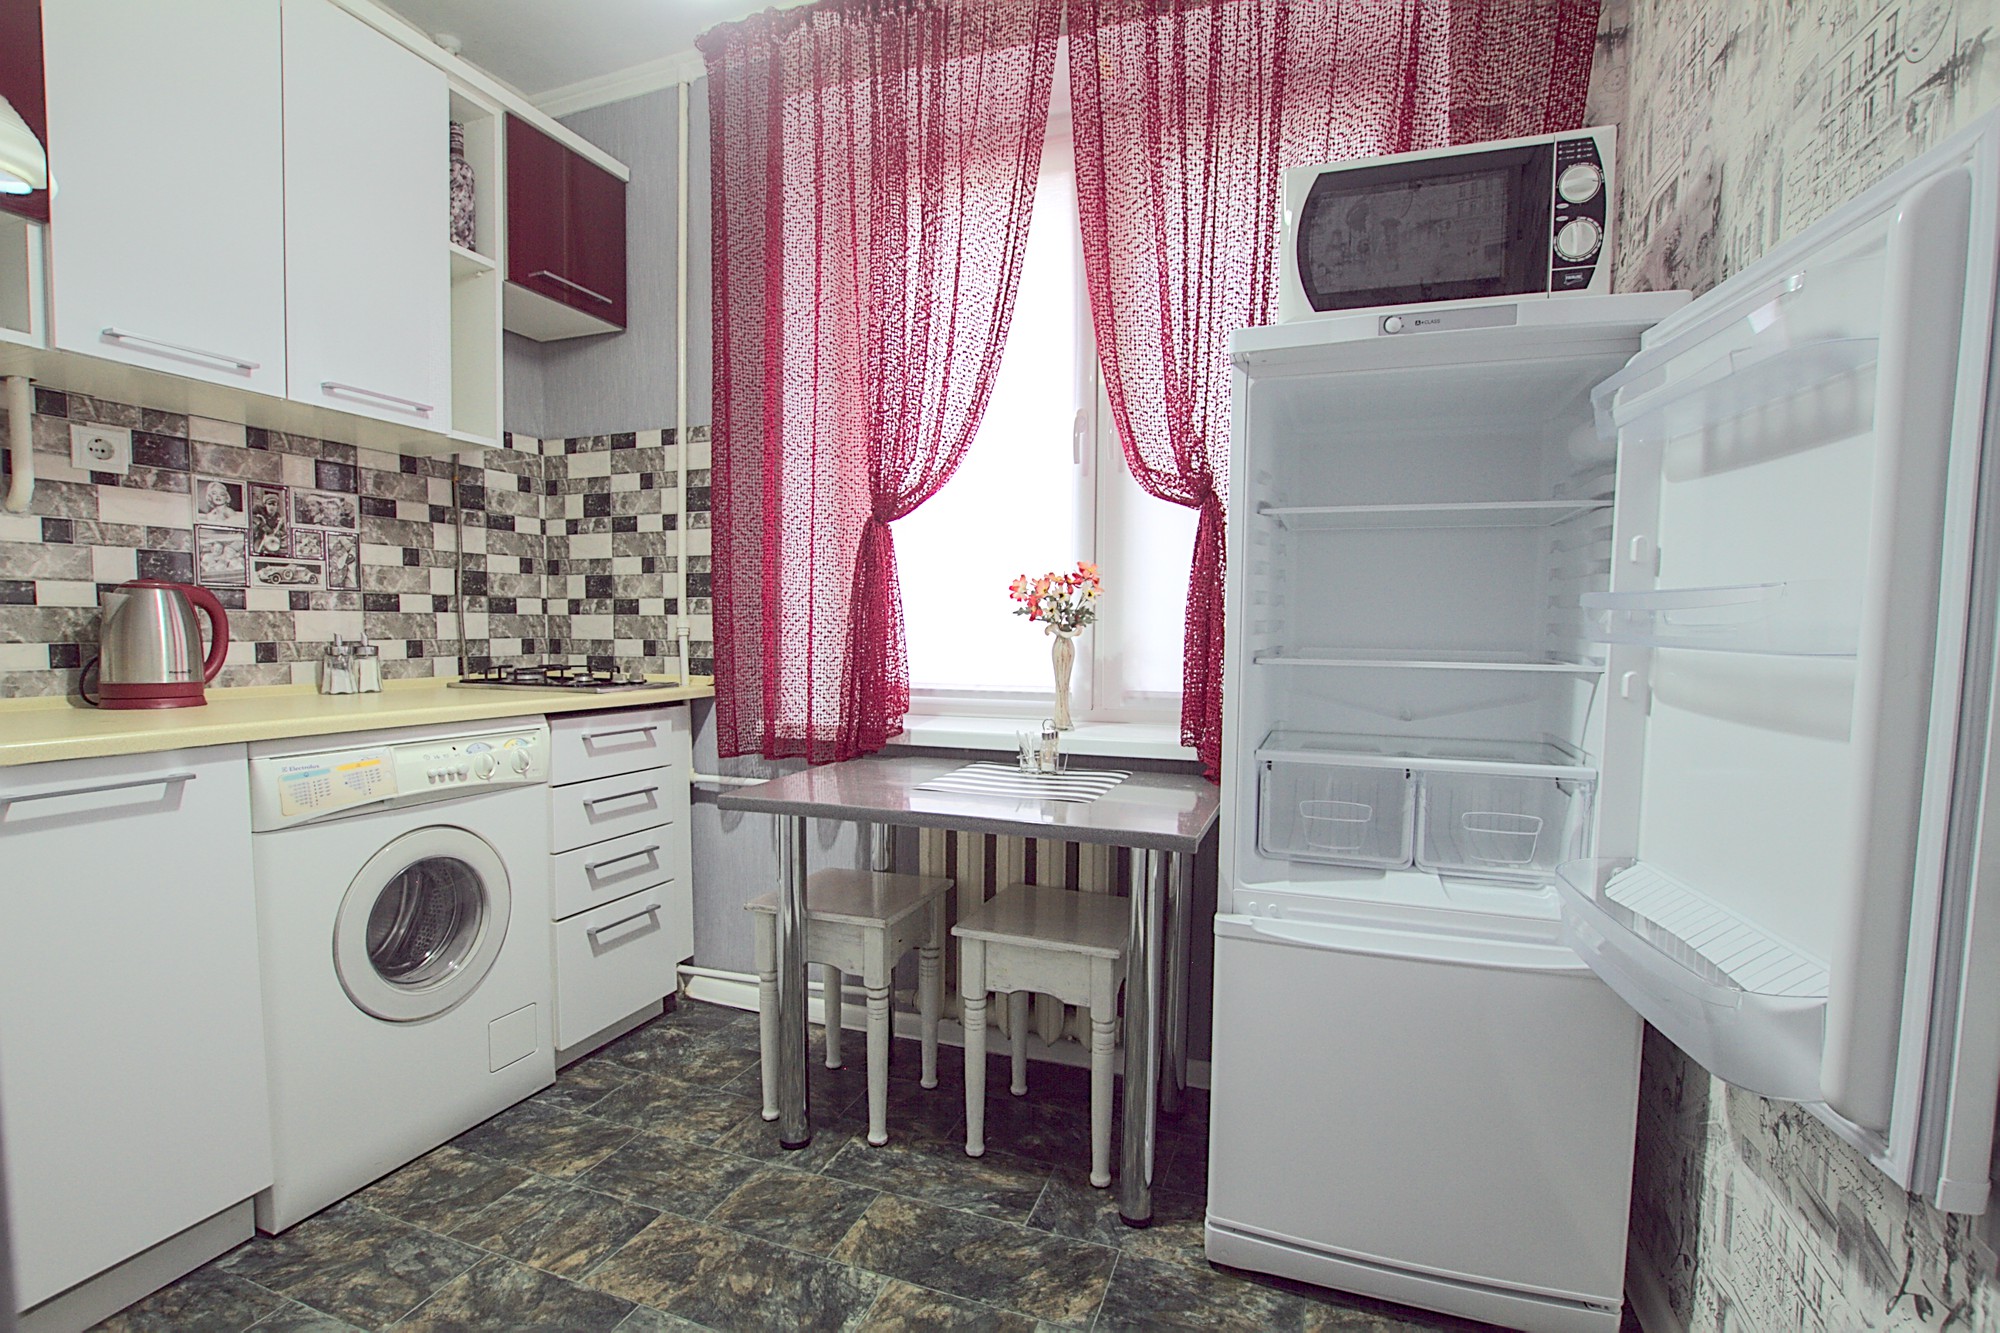 Boulevard Apartment is a 1 room apartment for rent in Chisinau, Moldova